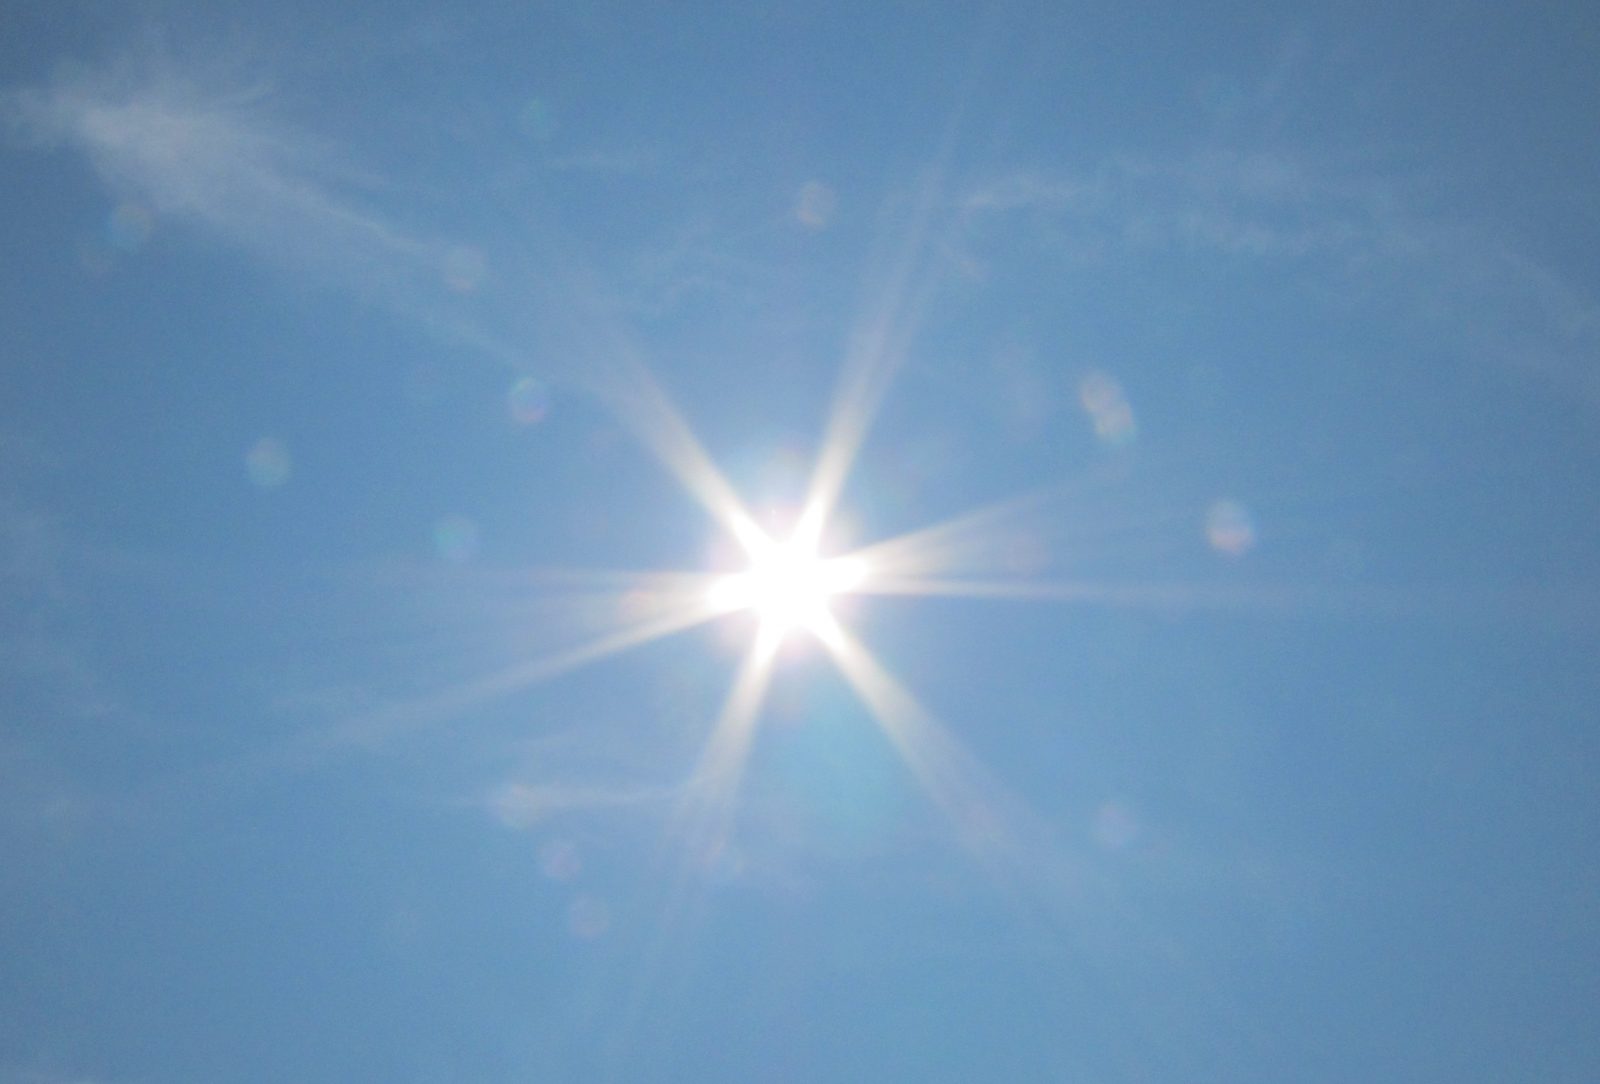 THE HEAT IS ON: Stay safe, says Environment Canada